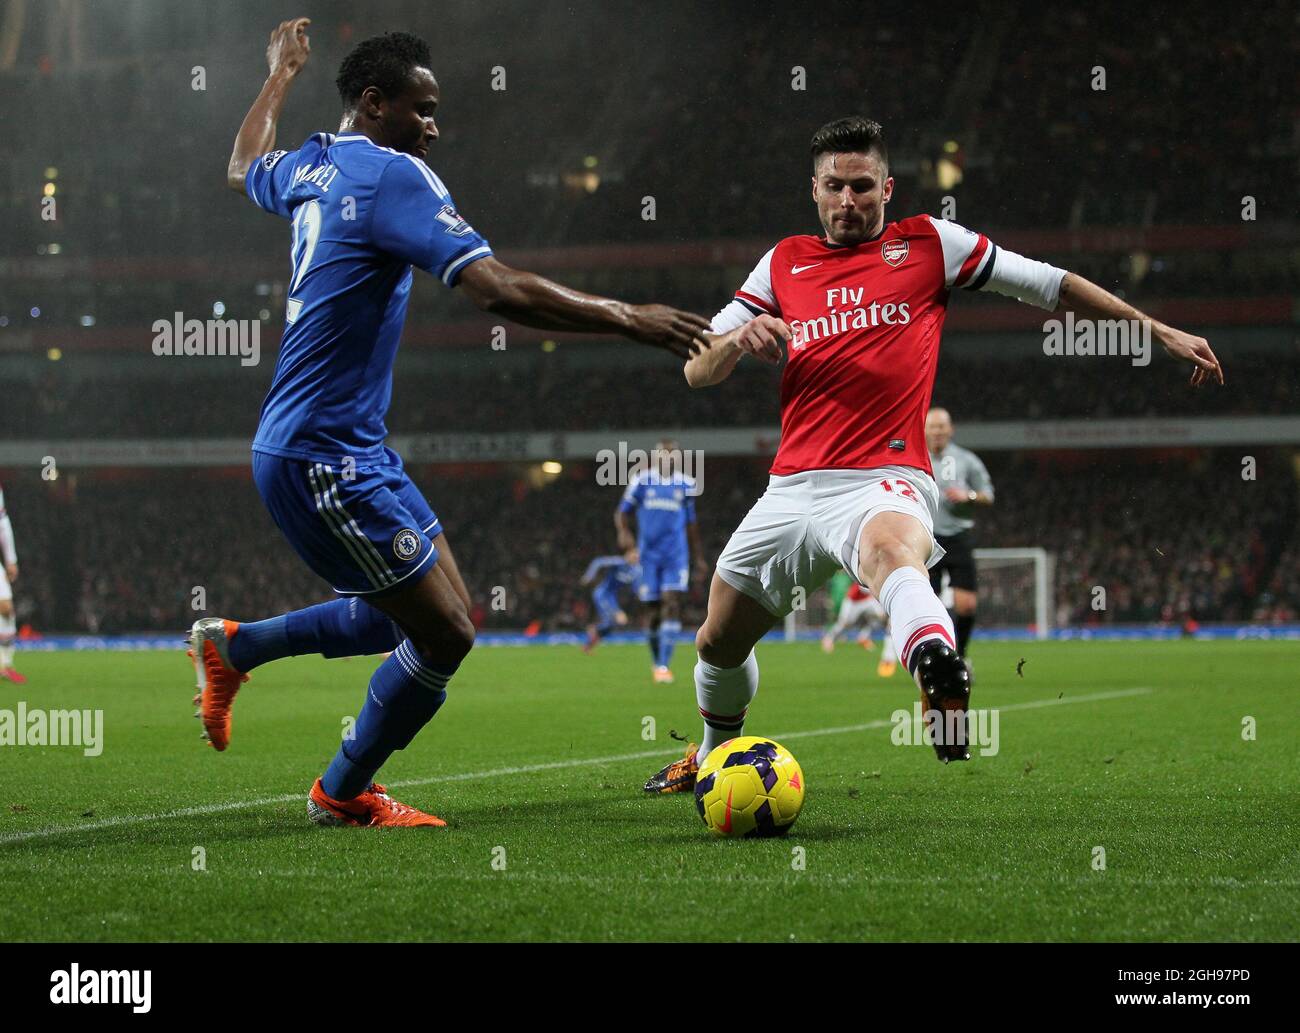 Arsenal's Olivier Giroud tussles with Chelsea's John Mikel Obi during the Barclays Premier League match between Arsenal and Chelsea at Emirates Stadium in London, Britain on Dec. 23, 2013. Pic David Klein Stock Photo